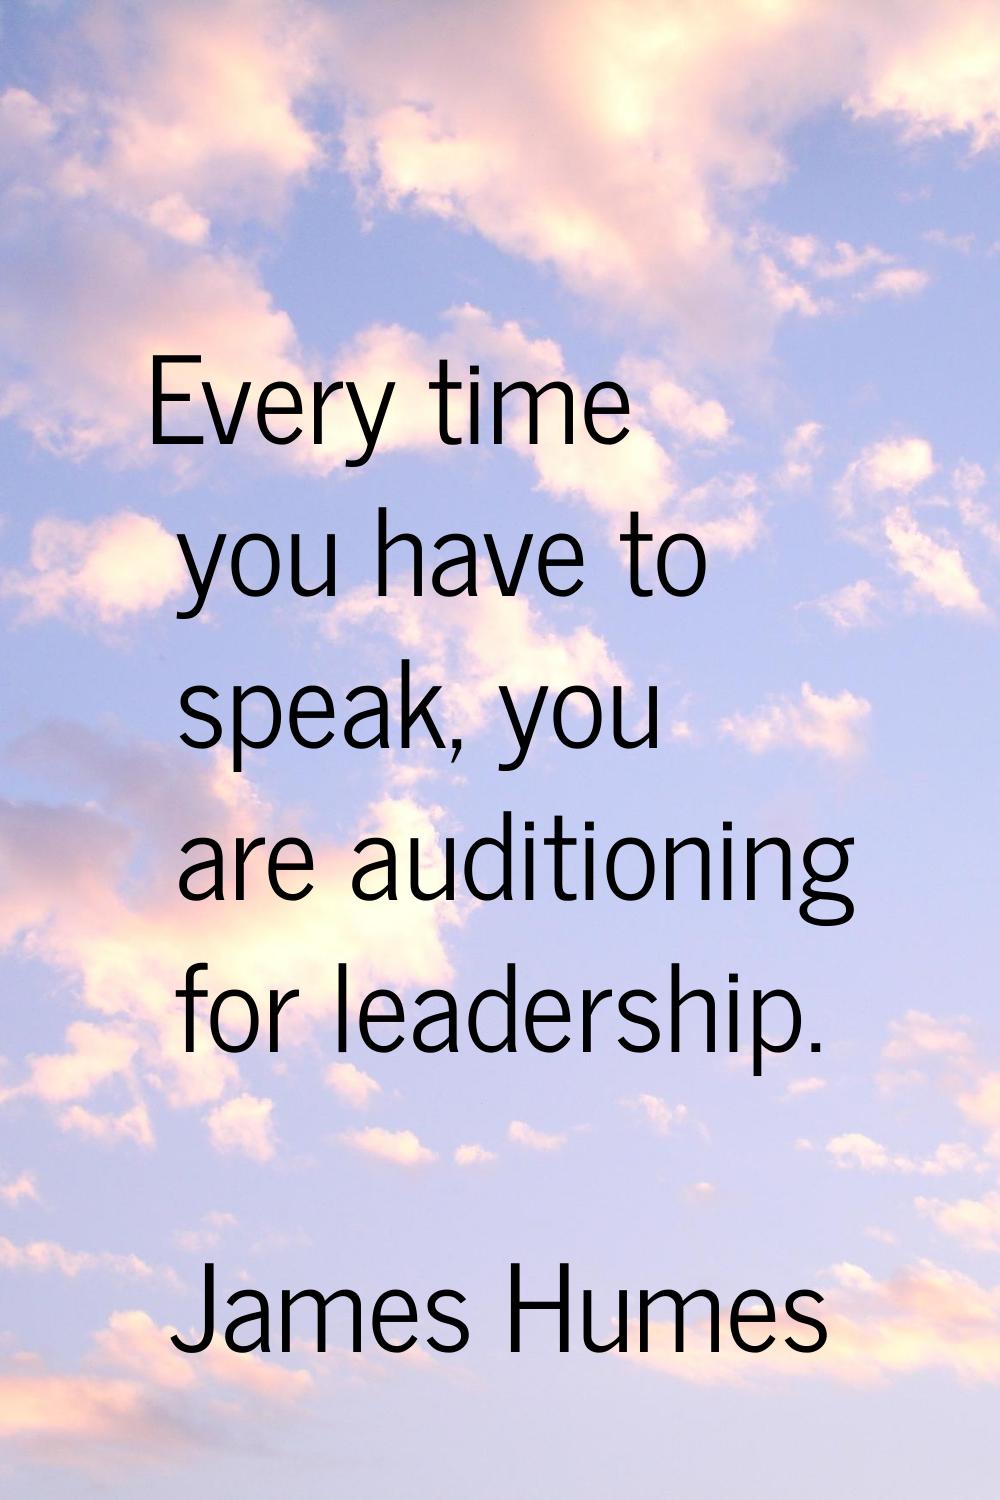 Every time you have to speak, you are auditioning for leadership.